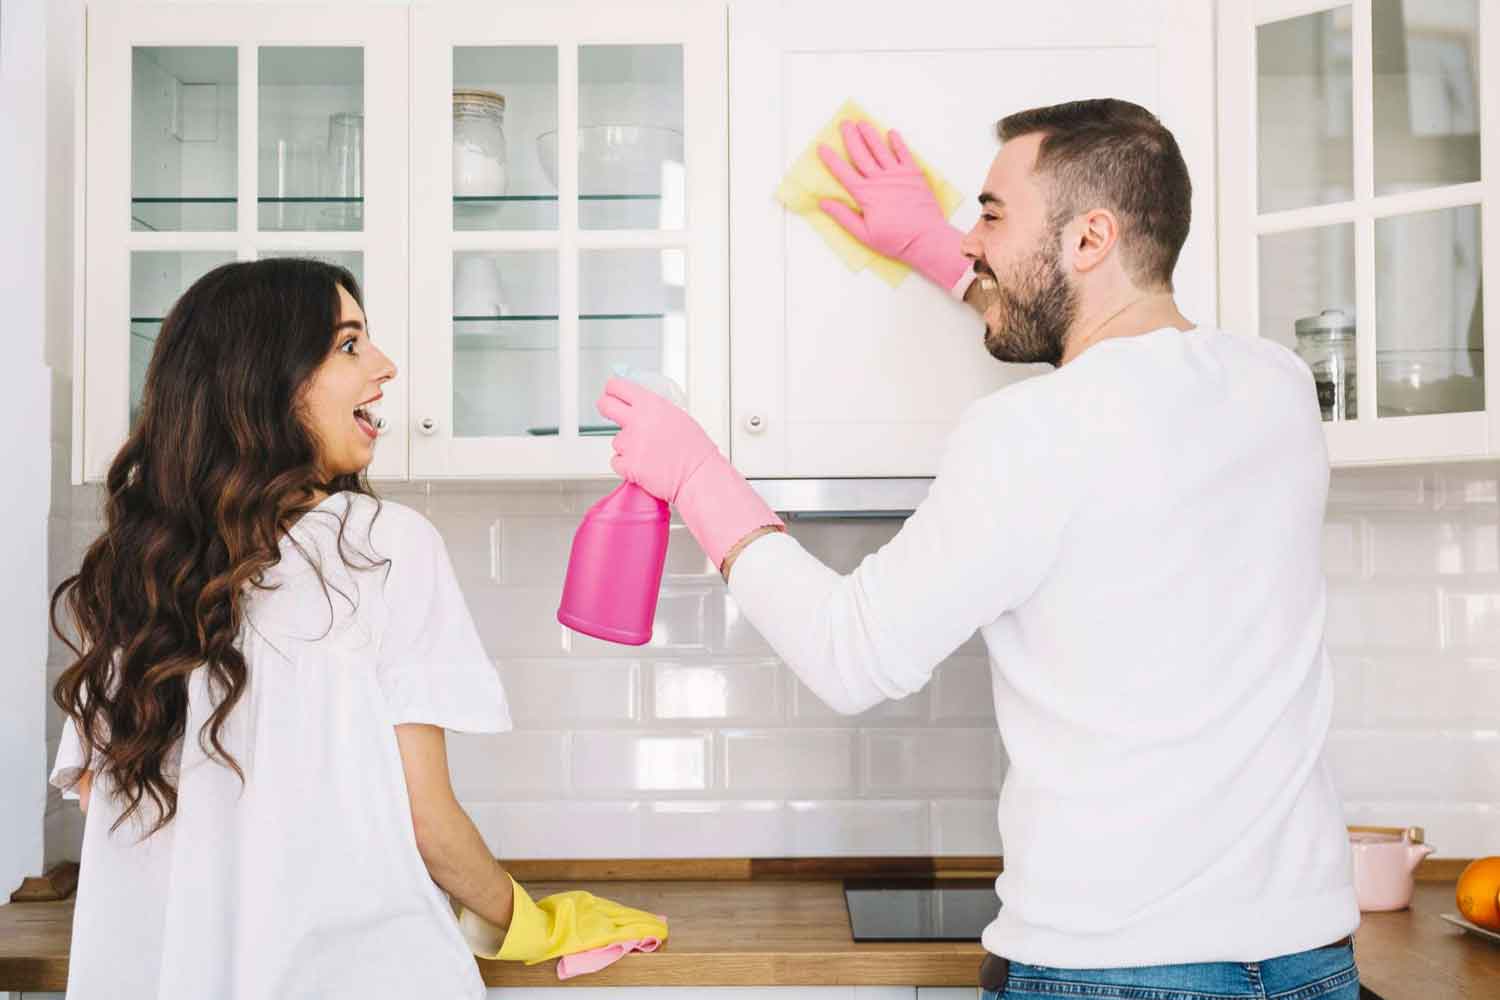 Cleaning & Maid Services in Gainesville, GA - (678) 283-5187 - Fresh Your Nearby House Cleaning Service